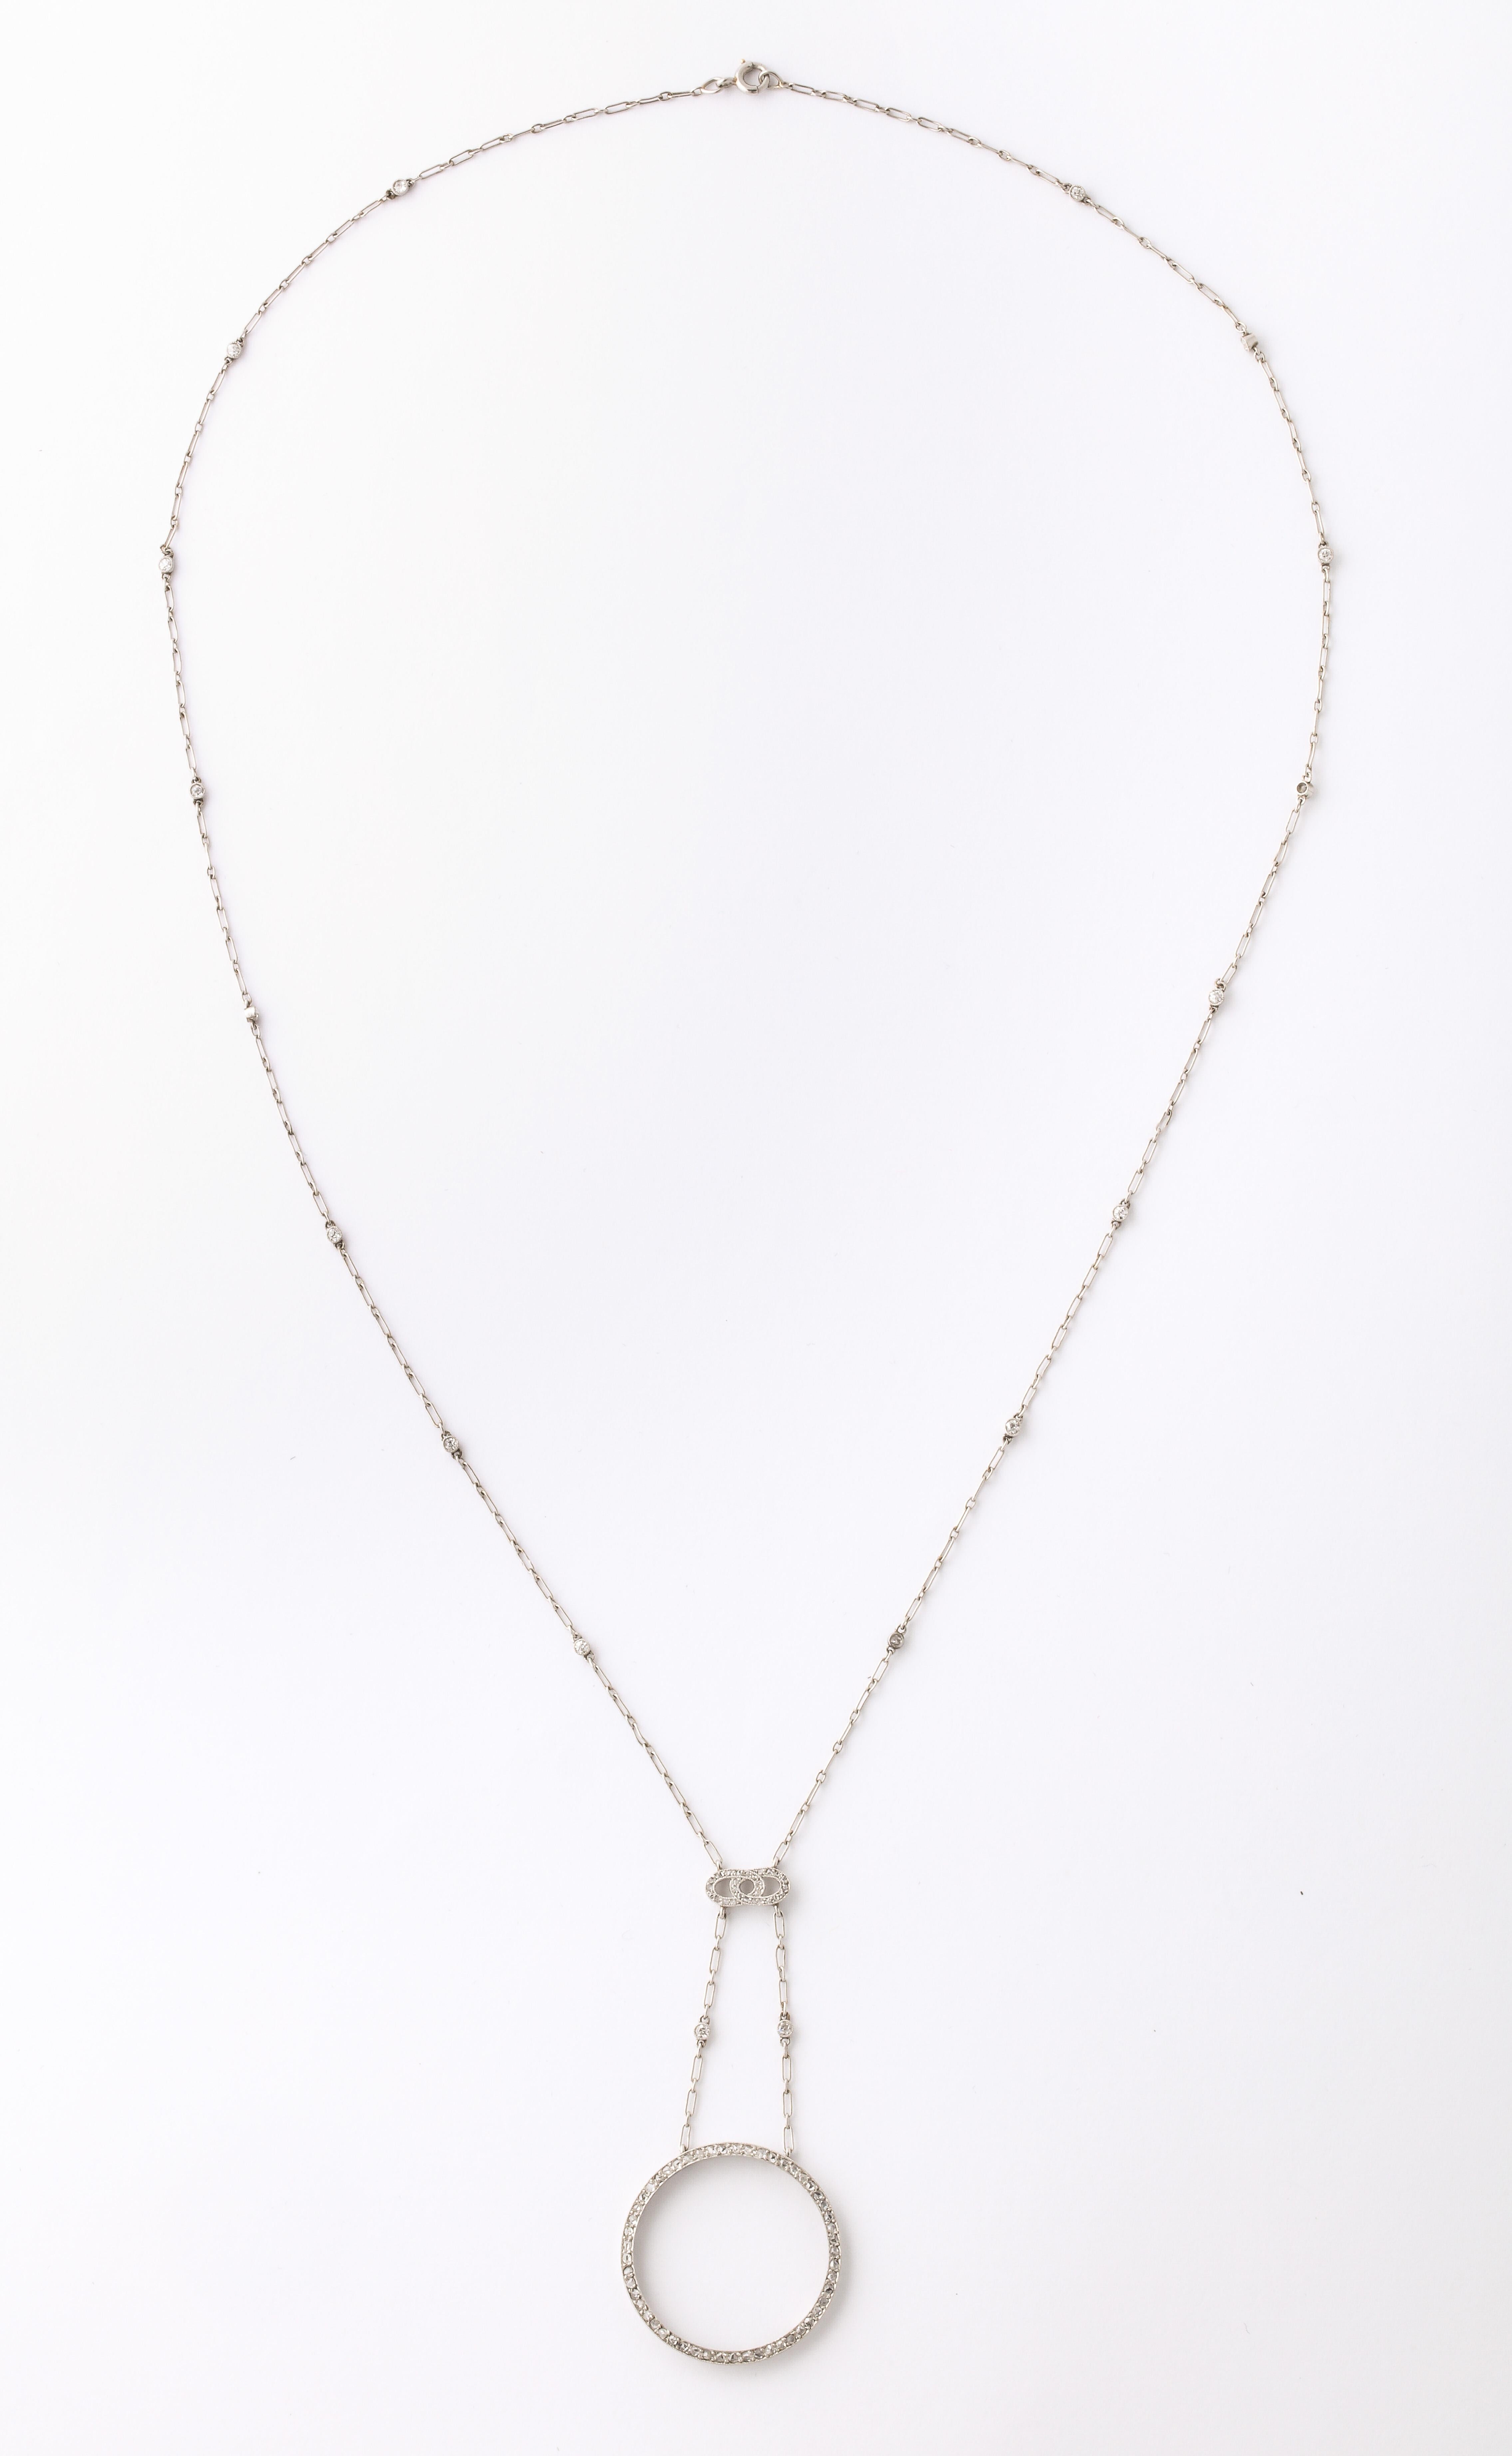 A beautiful Diamond and Platinum Necklace with a circle pendant of diamonds. The fine platinum chain has 18 diamonds interspersed  and a diamond bar attaching to
the pendant.
This is an original piece and can be worn day or night.